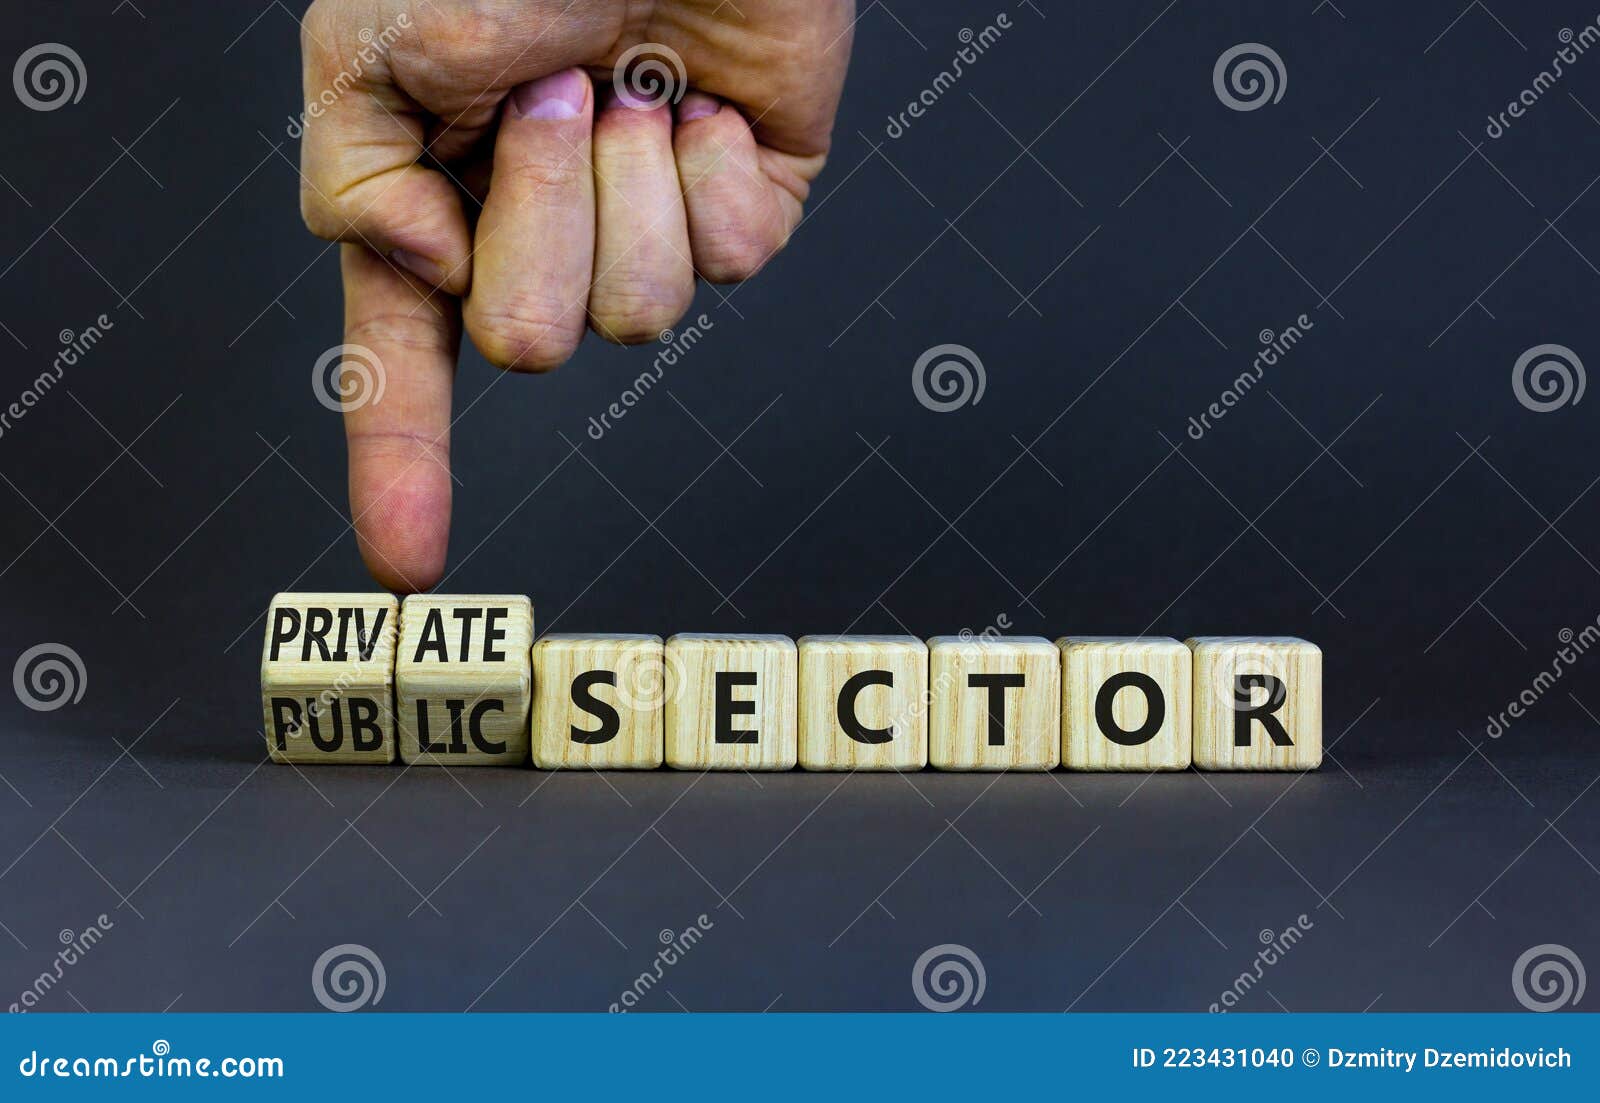 private or public sector . businessman turns cubes and changes words `public sector` to `private sector`. beautiful grey